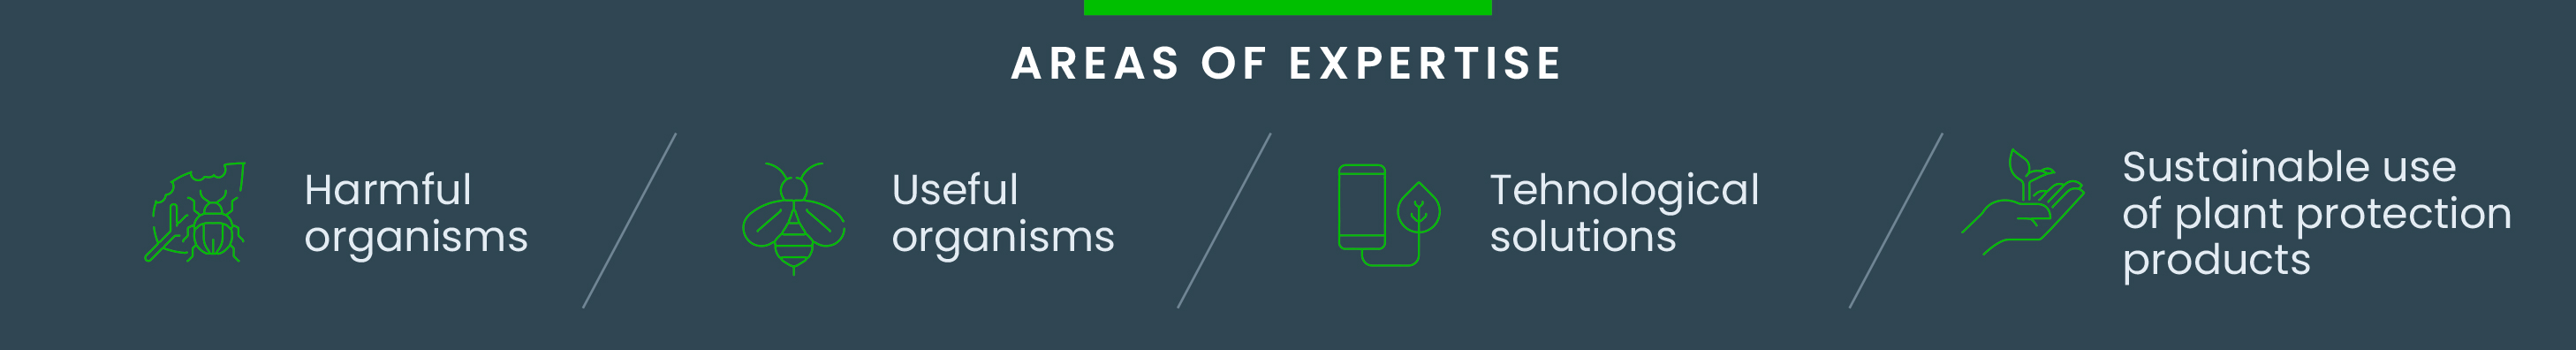 Areas of expertise